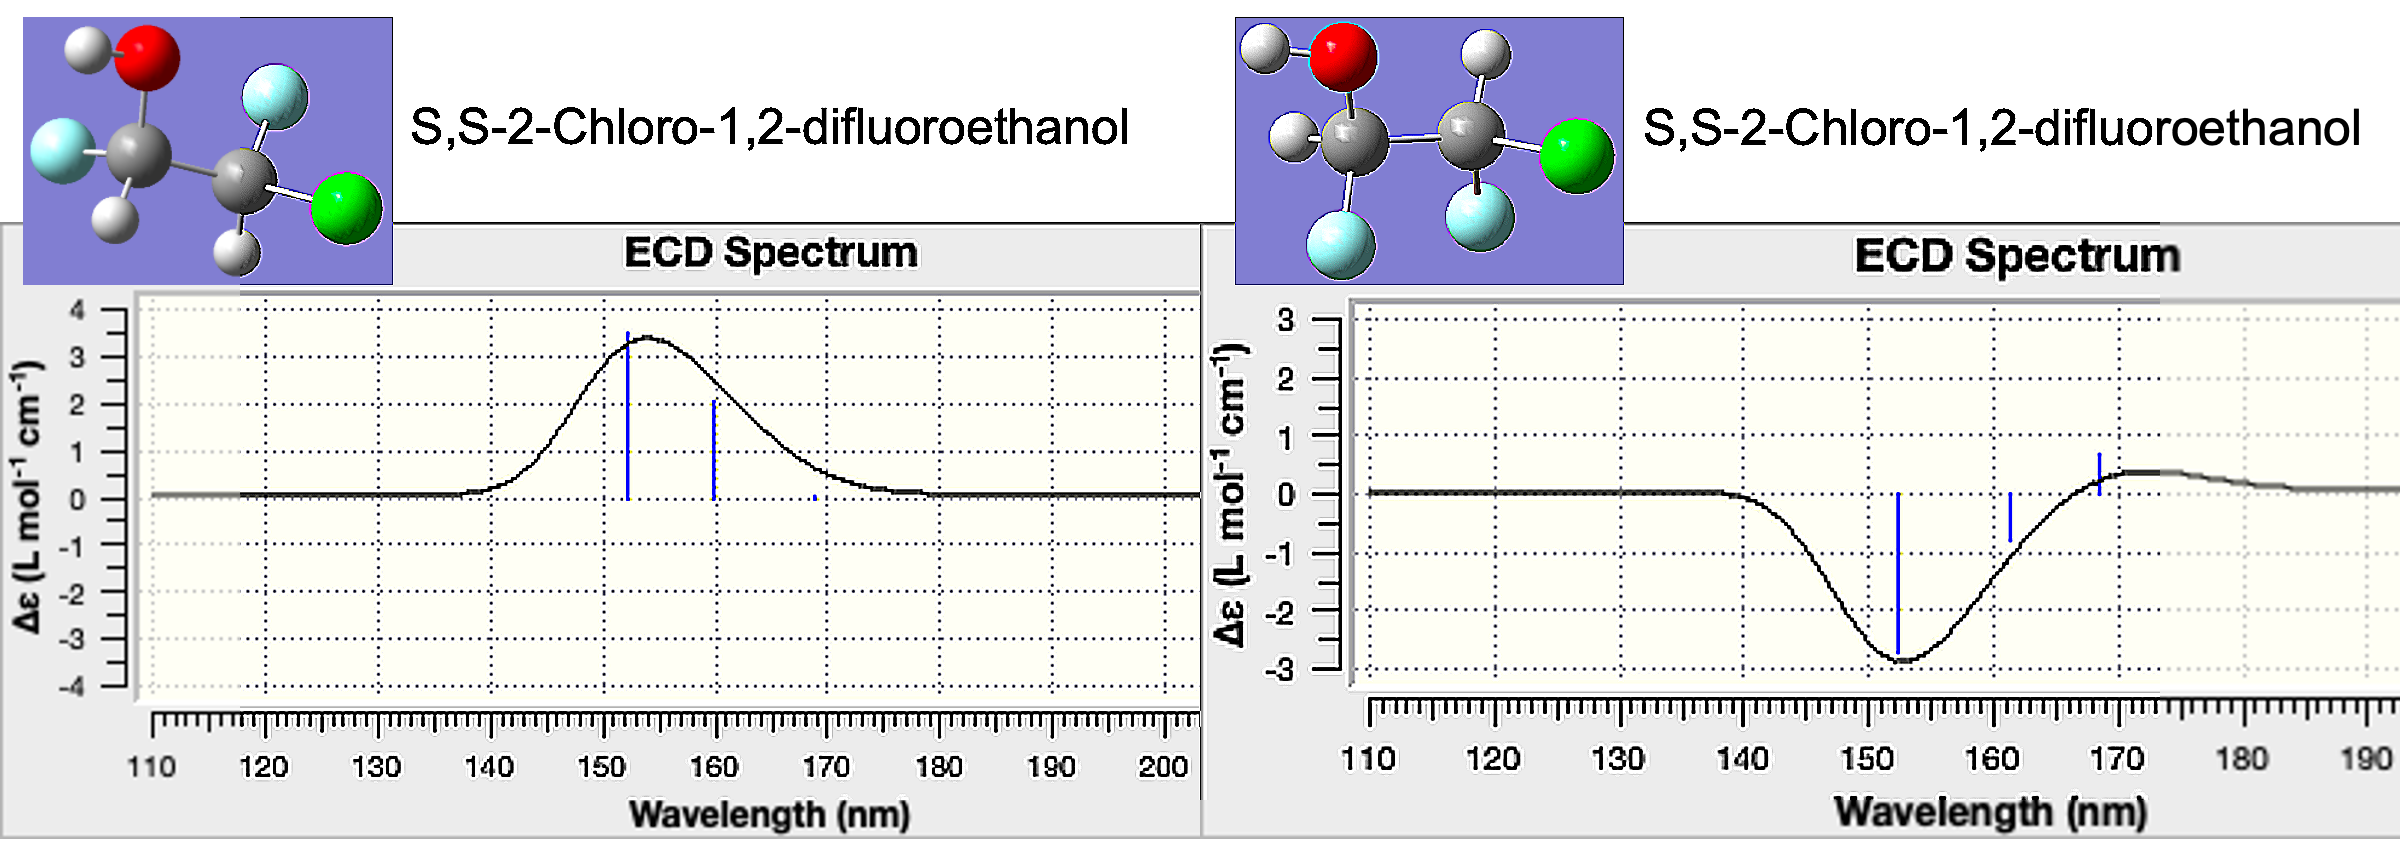 Compare ECD Spectra for enantiomers